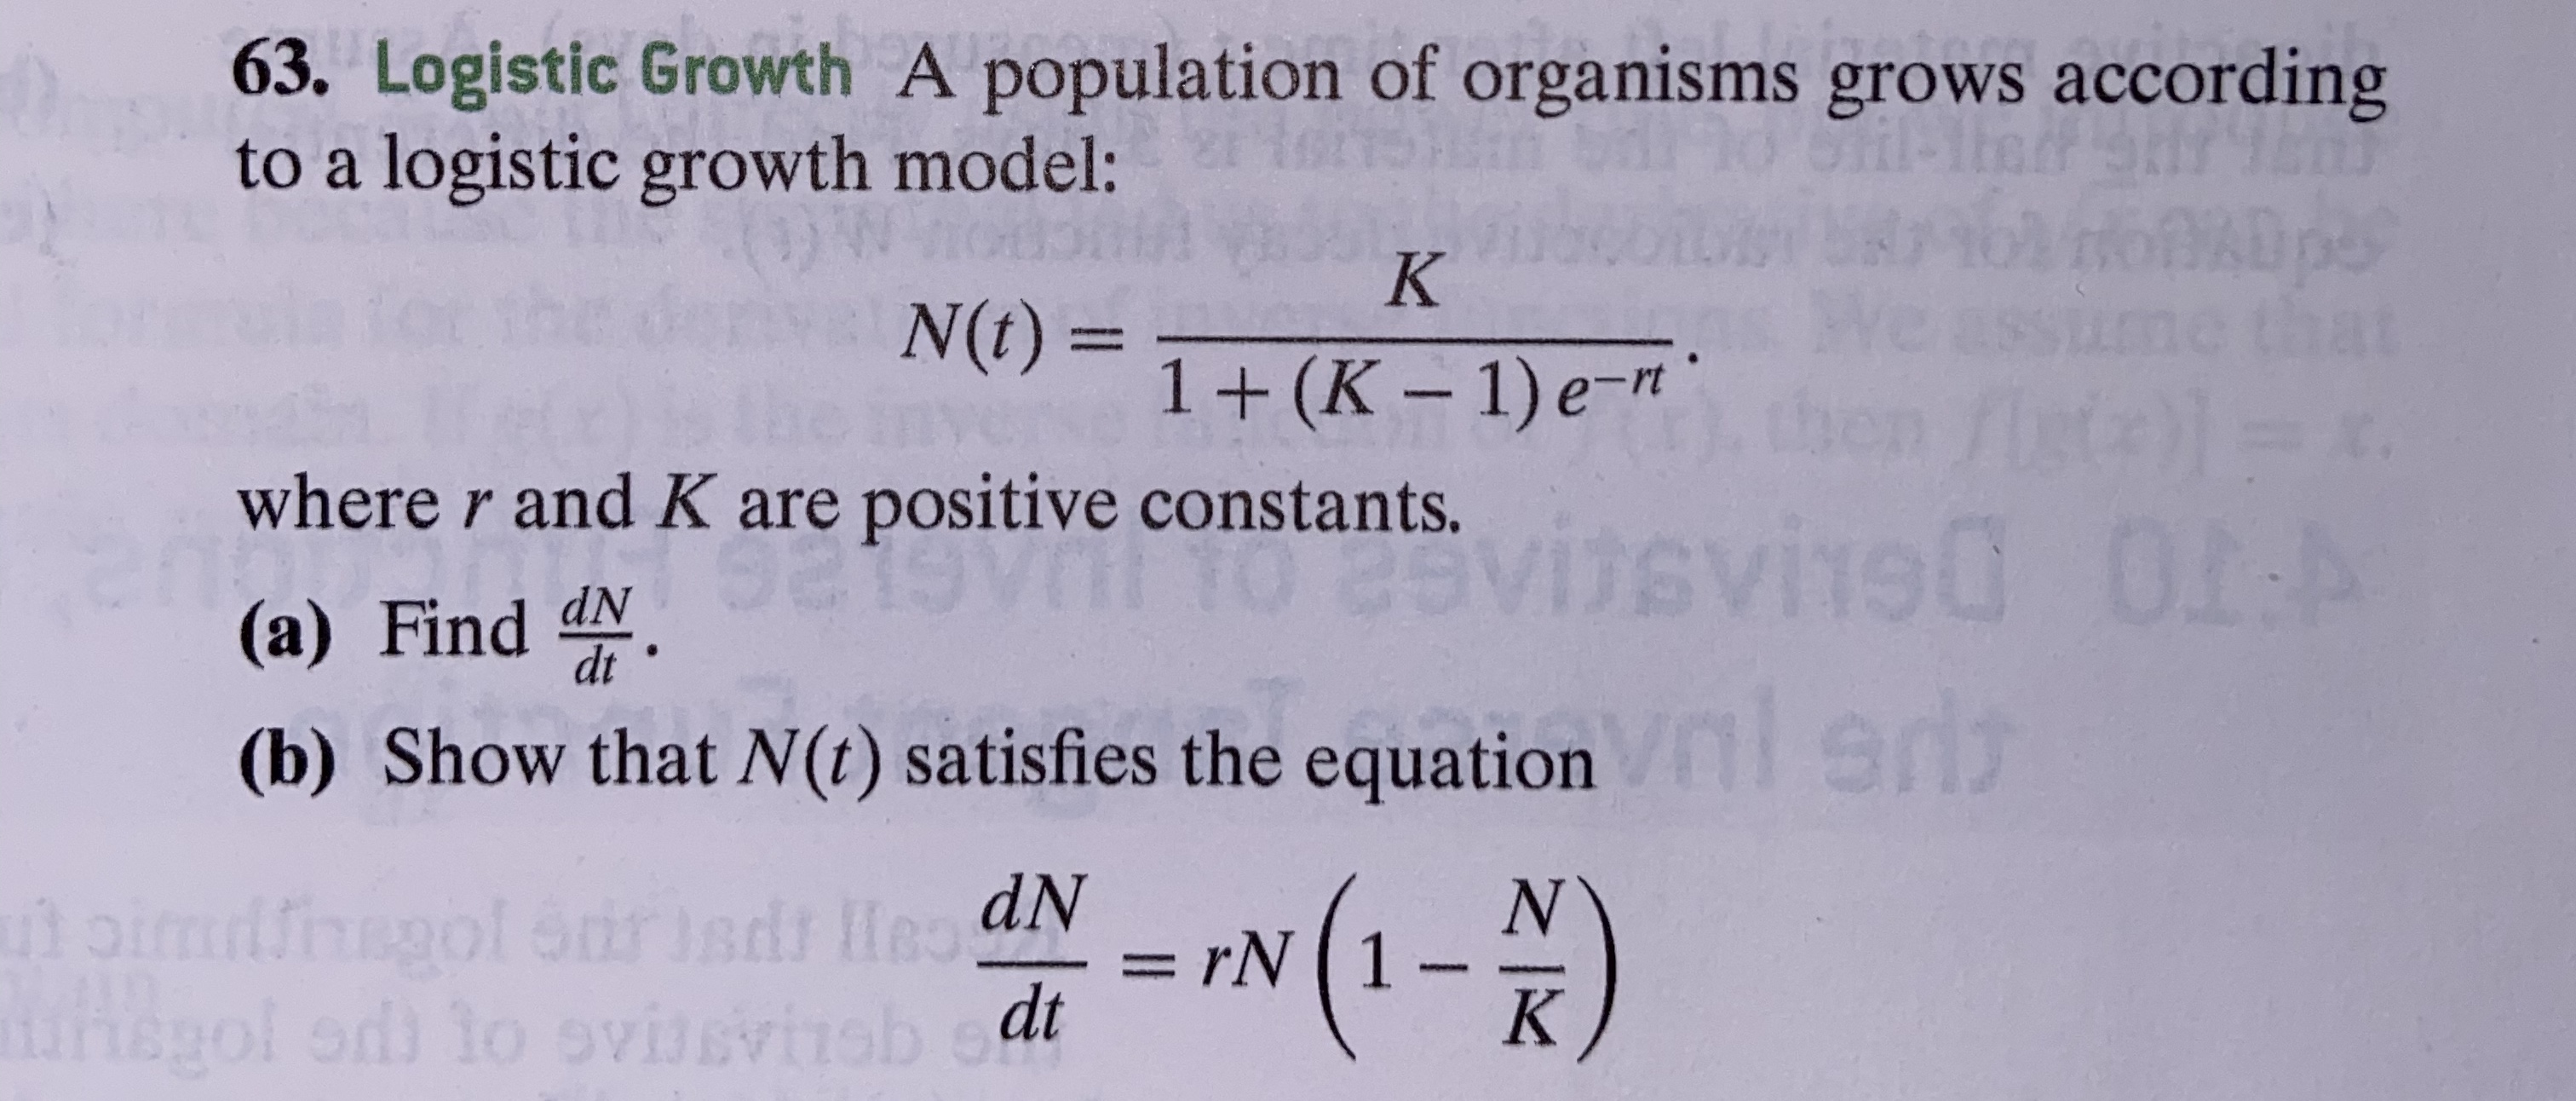 63. Logistic Growth A population of organisms grows according
to a logistic growth model:
K
N(t)=
1+ (K-1) e-mt
where r and K are positive constants.
0I:A
visvi90
(a) Find dN.
ST
(b) Show that N(t) satisfies the equation
1-)
N
rN 1
K
utoimiiol Strisdr HeaN
gol od to ovissvisb et
